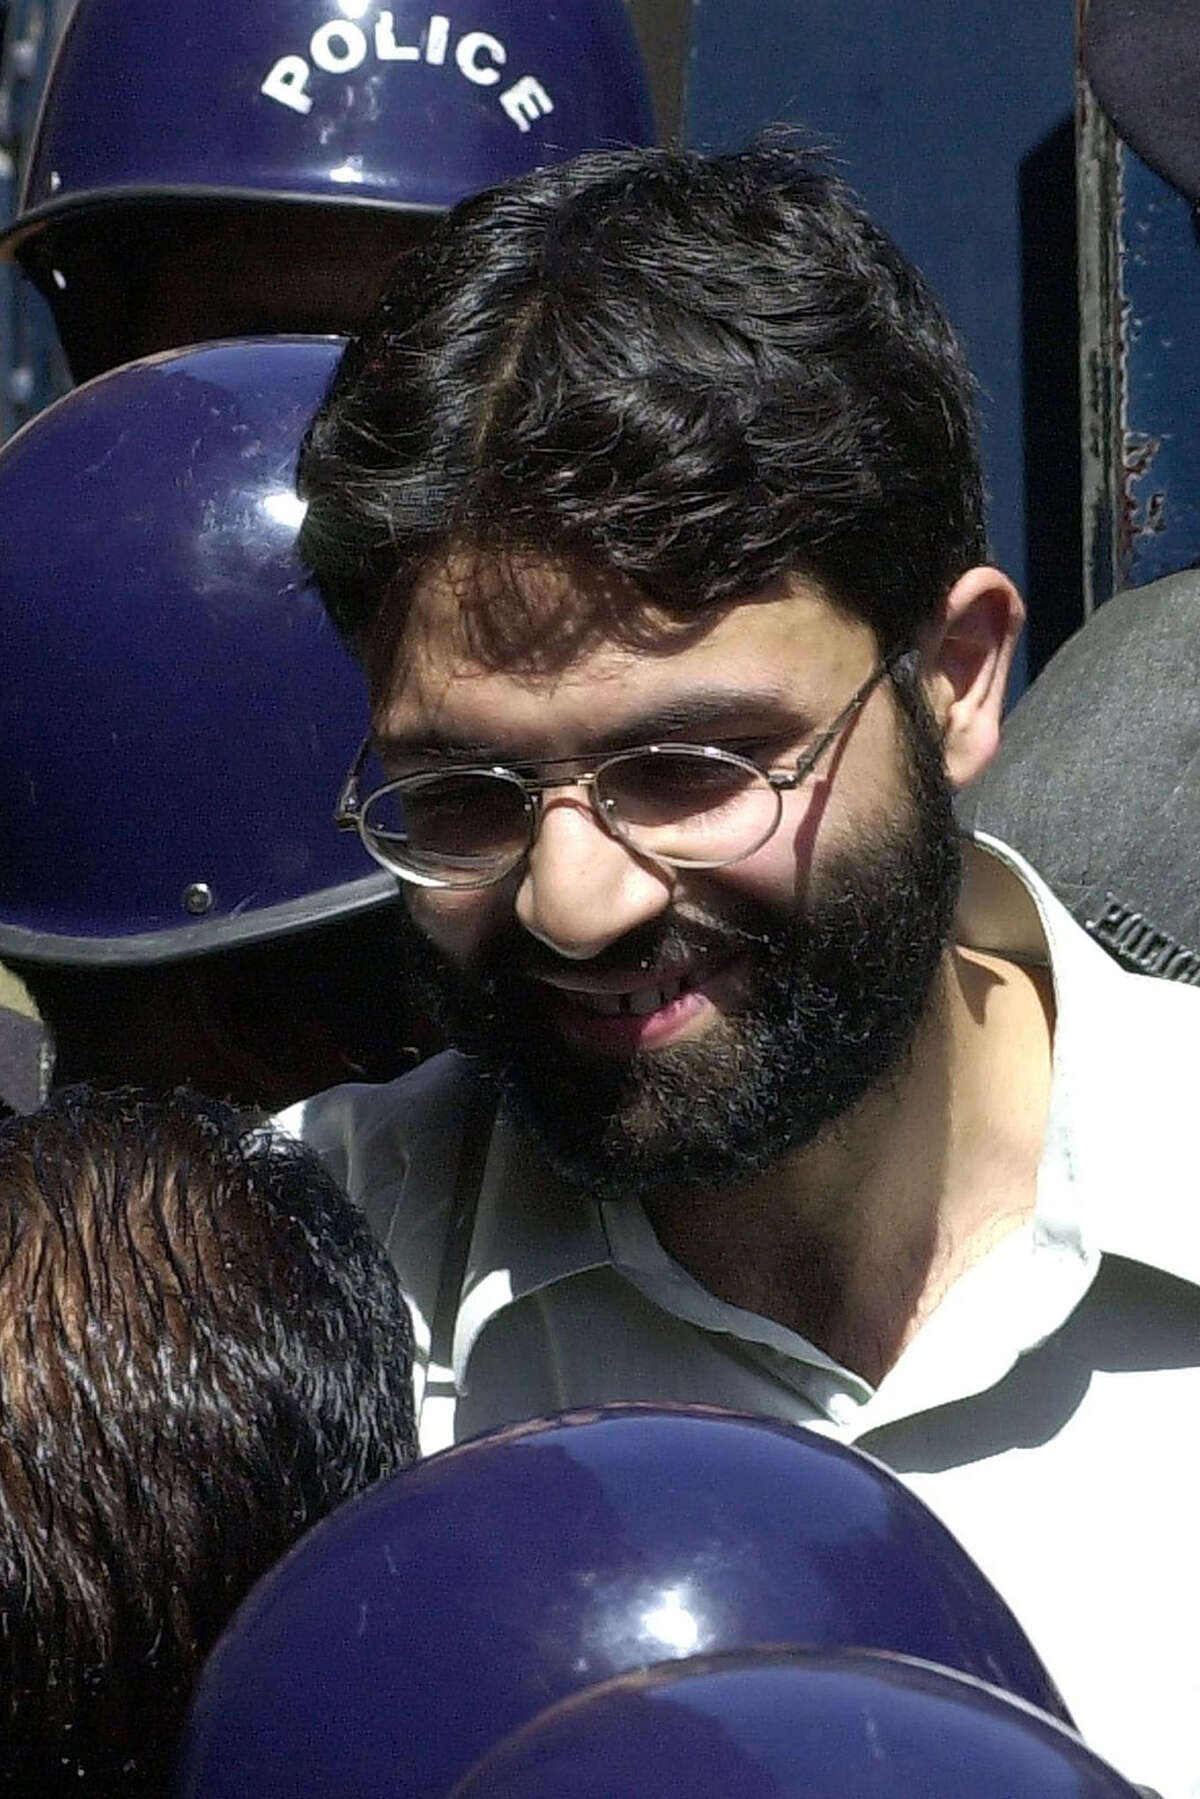 (FILES) In this file taken on March 29, 2002, Sheikh Omar, chief suspect of slain US journalist Daniel Pearl smiles while talking to Pakistani police officials in Karachi. - A Pakistani court on April 2, 2020 overturned the death sentence for British-born militant Ahmed Omar Saeed Sheikh, who had been convicted over the 2002 killing of American journalist Daniel Pearl. (Photo by Aamir QURESHI / AFP) (Photo by AAMIR QURESHI/AFP via Getty Images)